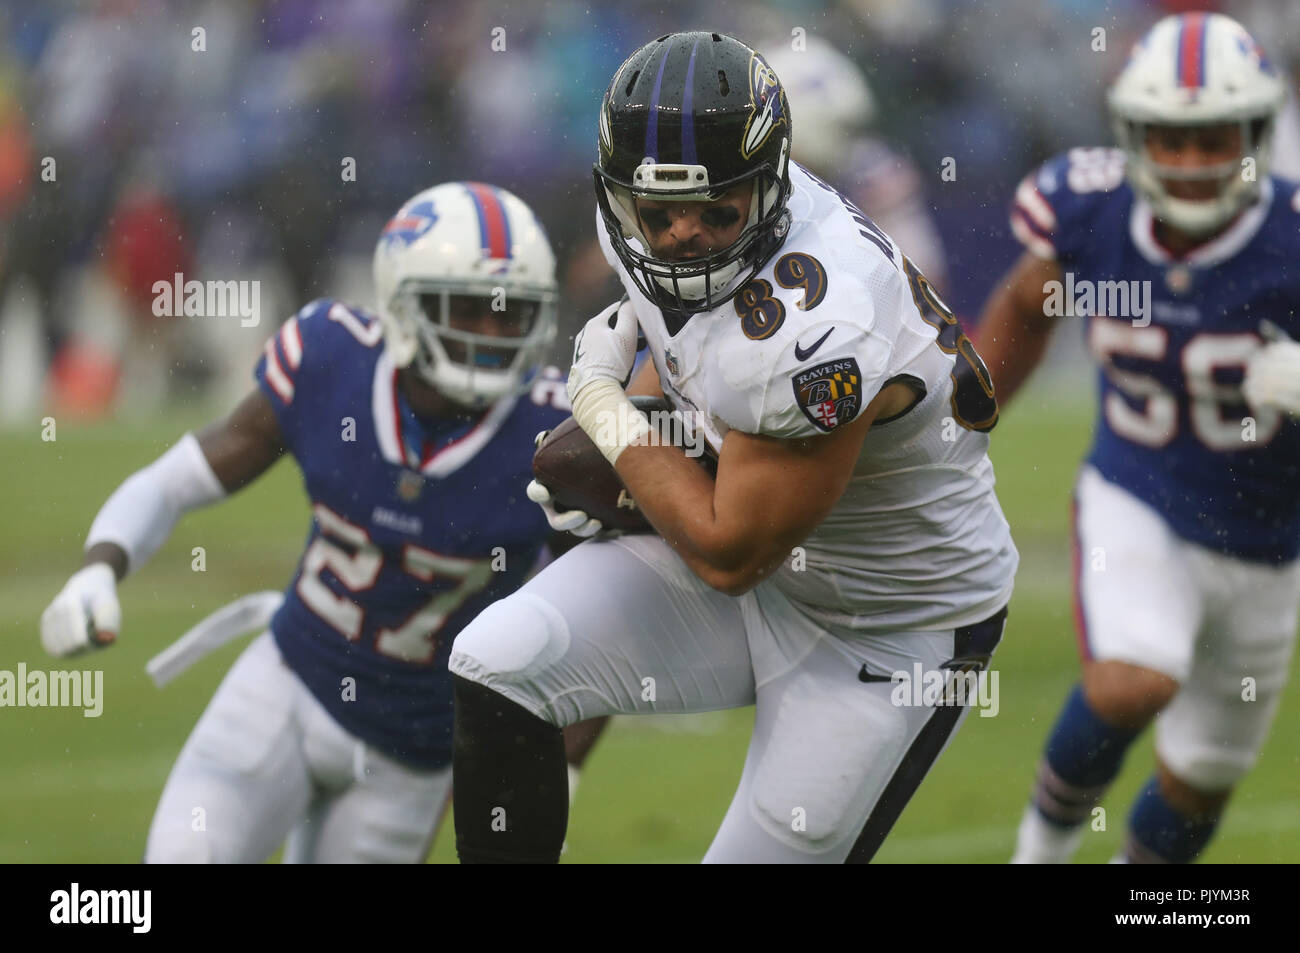 Baltimore, USA. 9th Sept 2018. Baltimore Ravens TE Mark Andrews (89) in action during a game against the Buffalo Bills at M&T Bank Stadium in Baltimore, MD on September 9, 2018. Photo/ Mike Buscher/Cal Sport Media Credit: Cal Sport Media/Alamy Live News Stock Photo